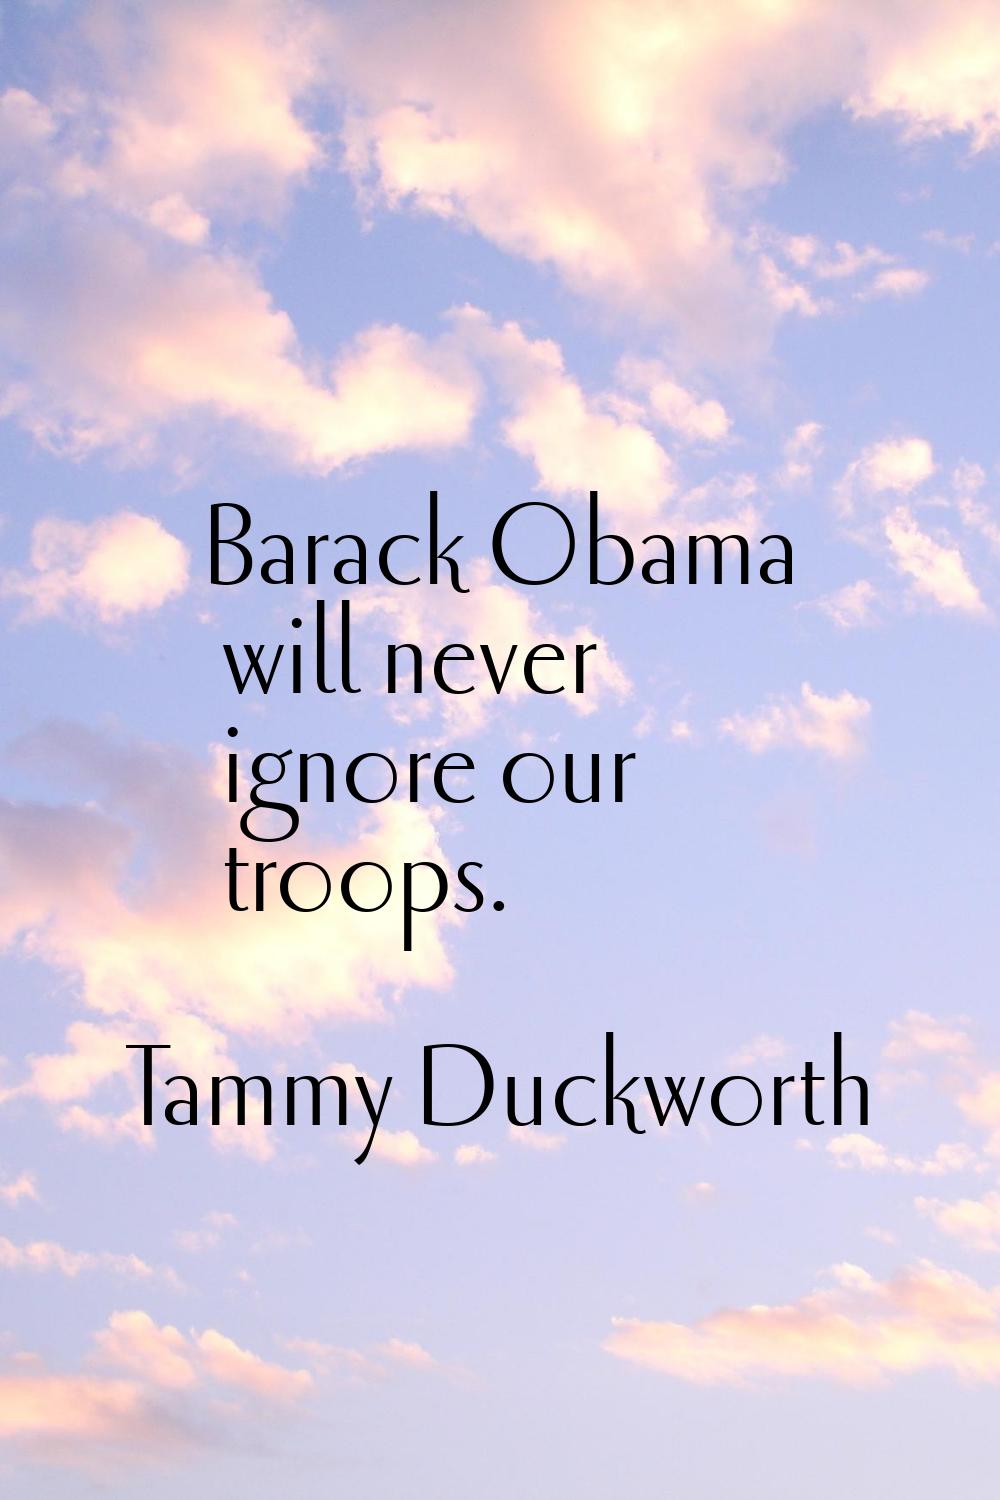 Barack Obama will never ignore our troops.